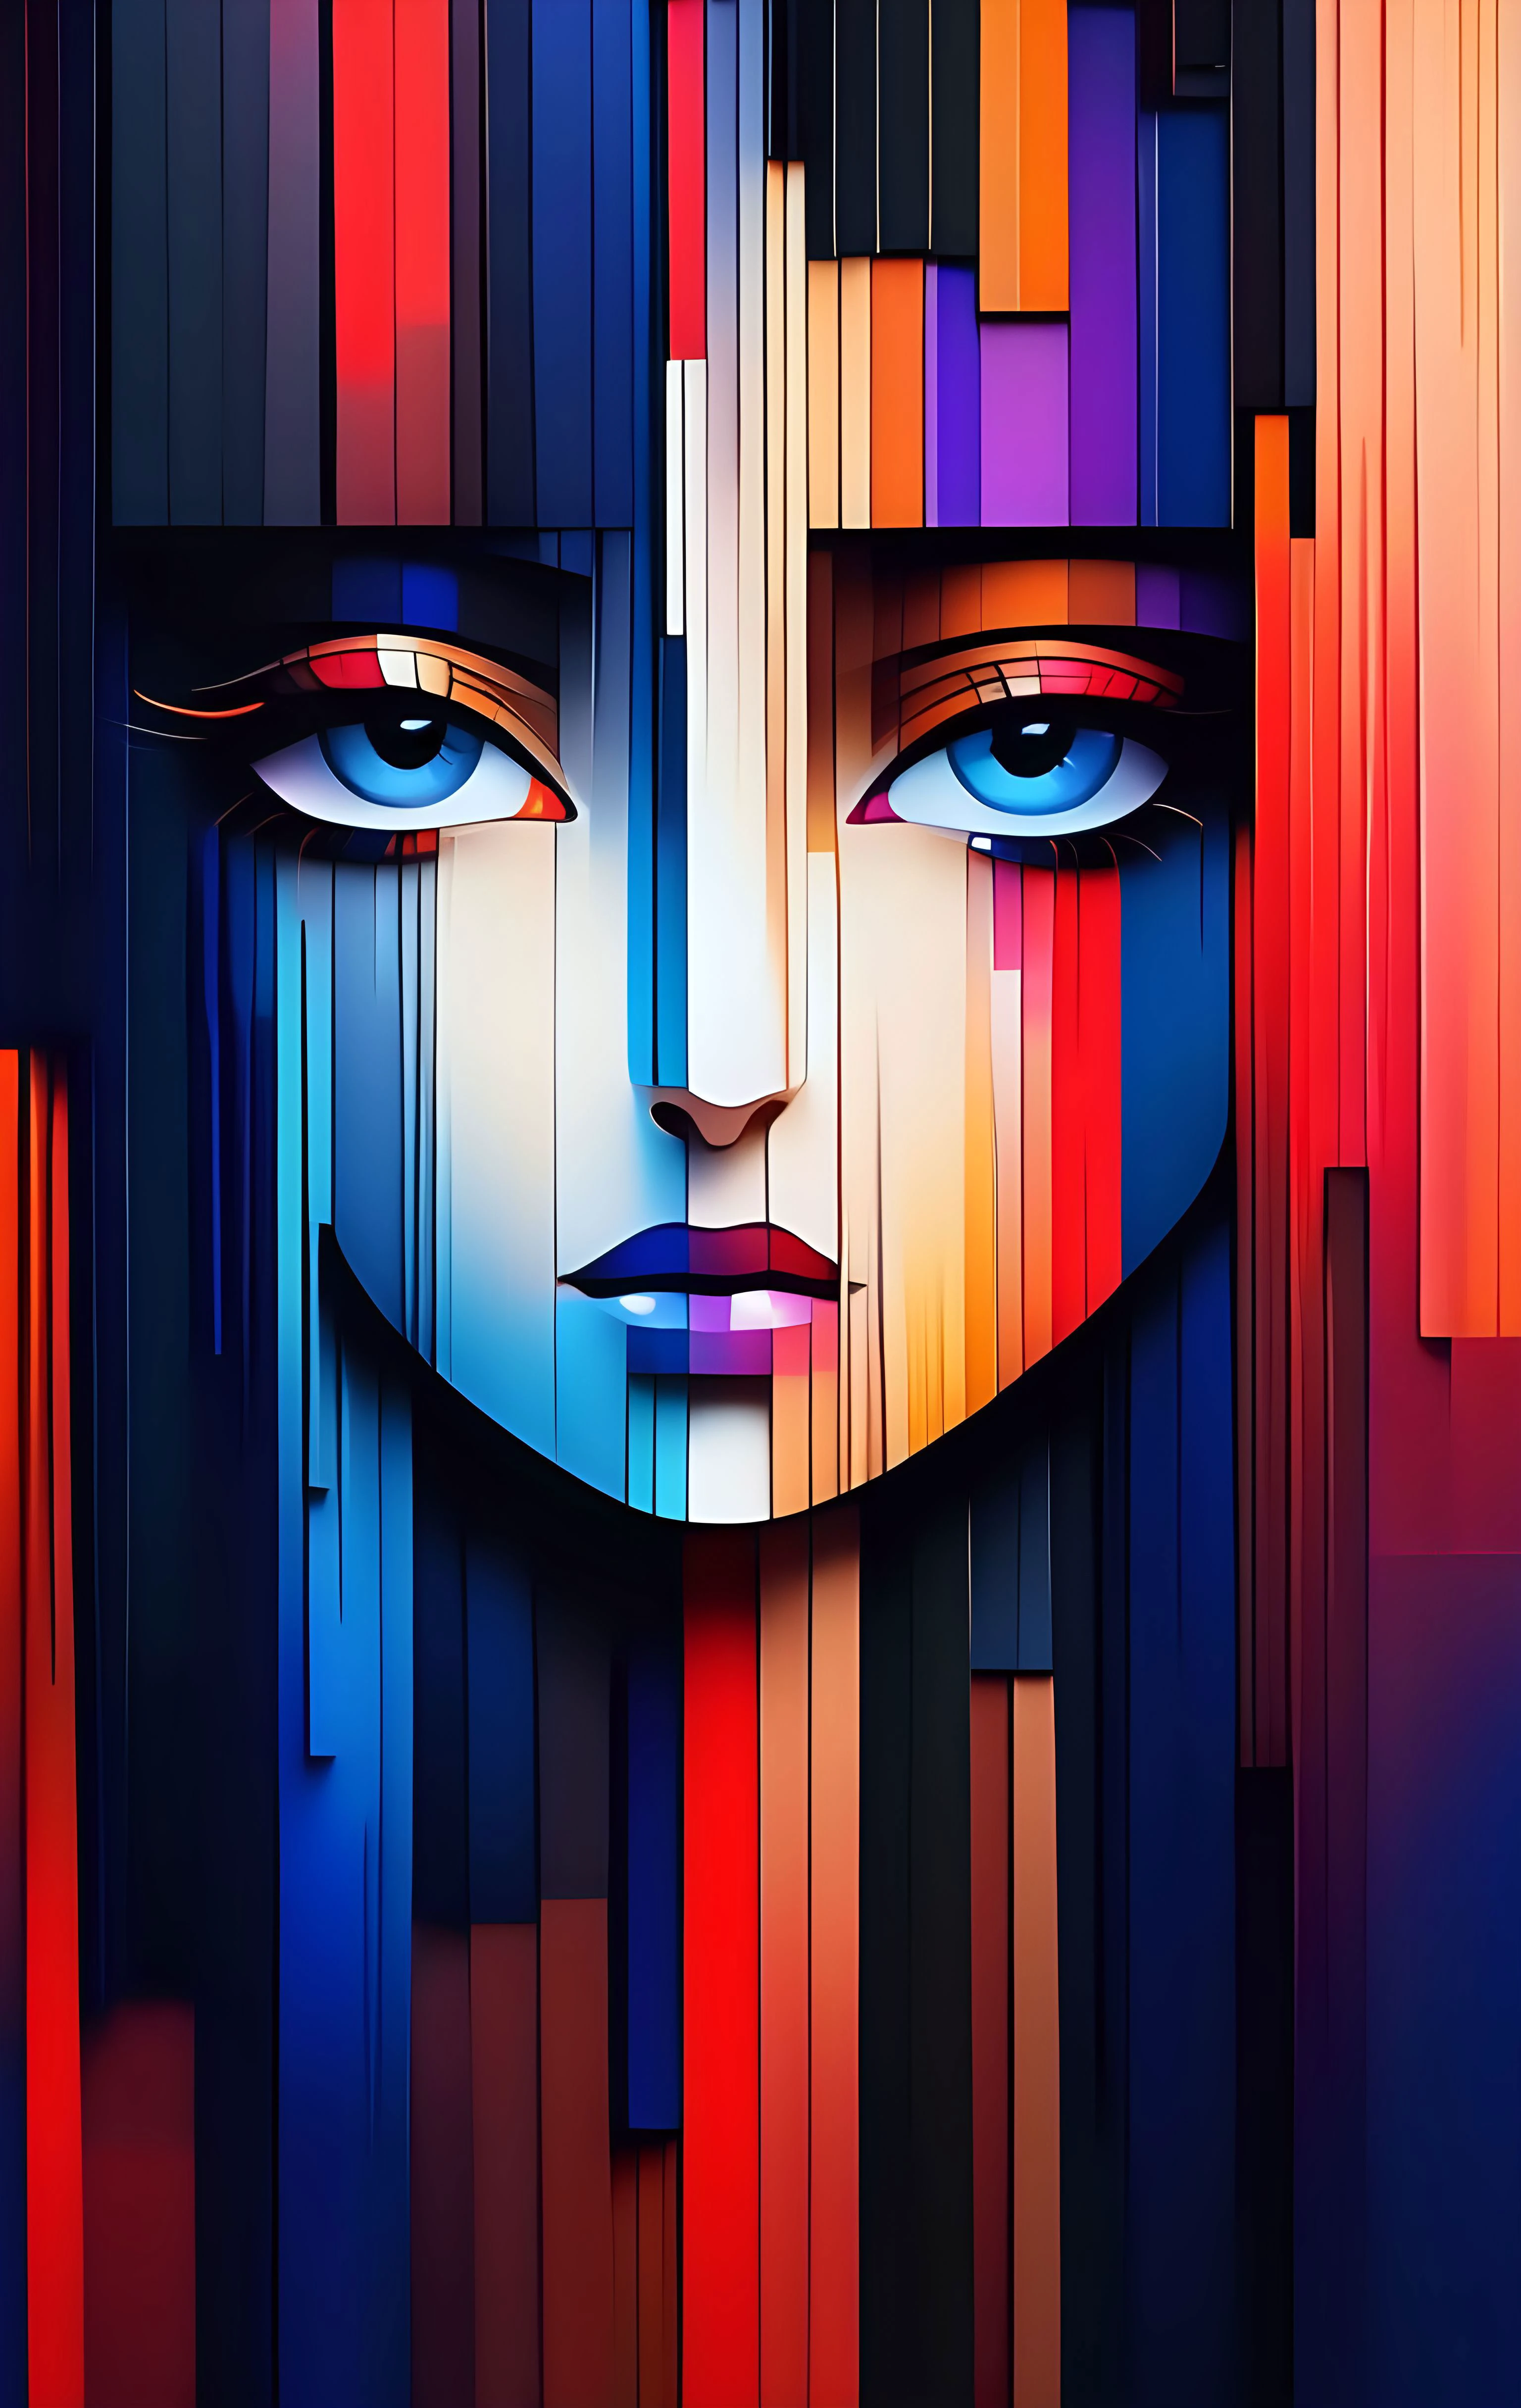 abstract style by Aliza Razell and Pierre Soulages,
Ultra High Resolution, wallpaper, 8K,Rich texture details, hyper detailed, detailed eyes, detailed background, dramatic angle,  . non-representational, colors and shapes, expression of feelings, imaginative, highly detailed